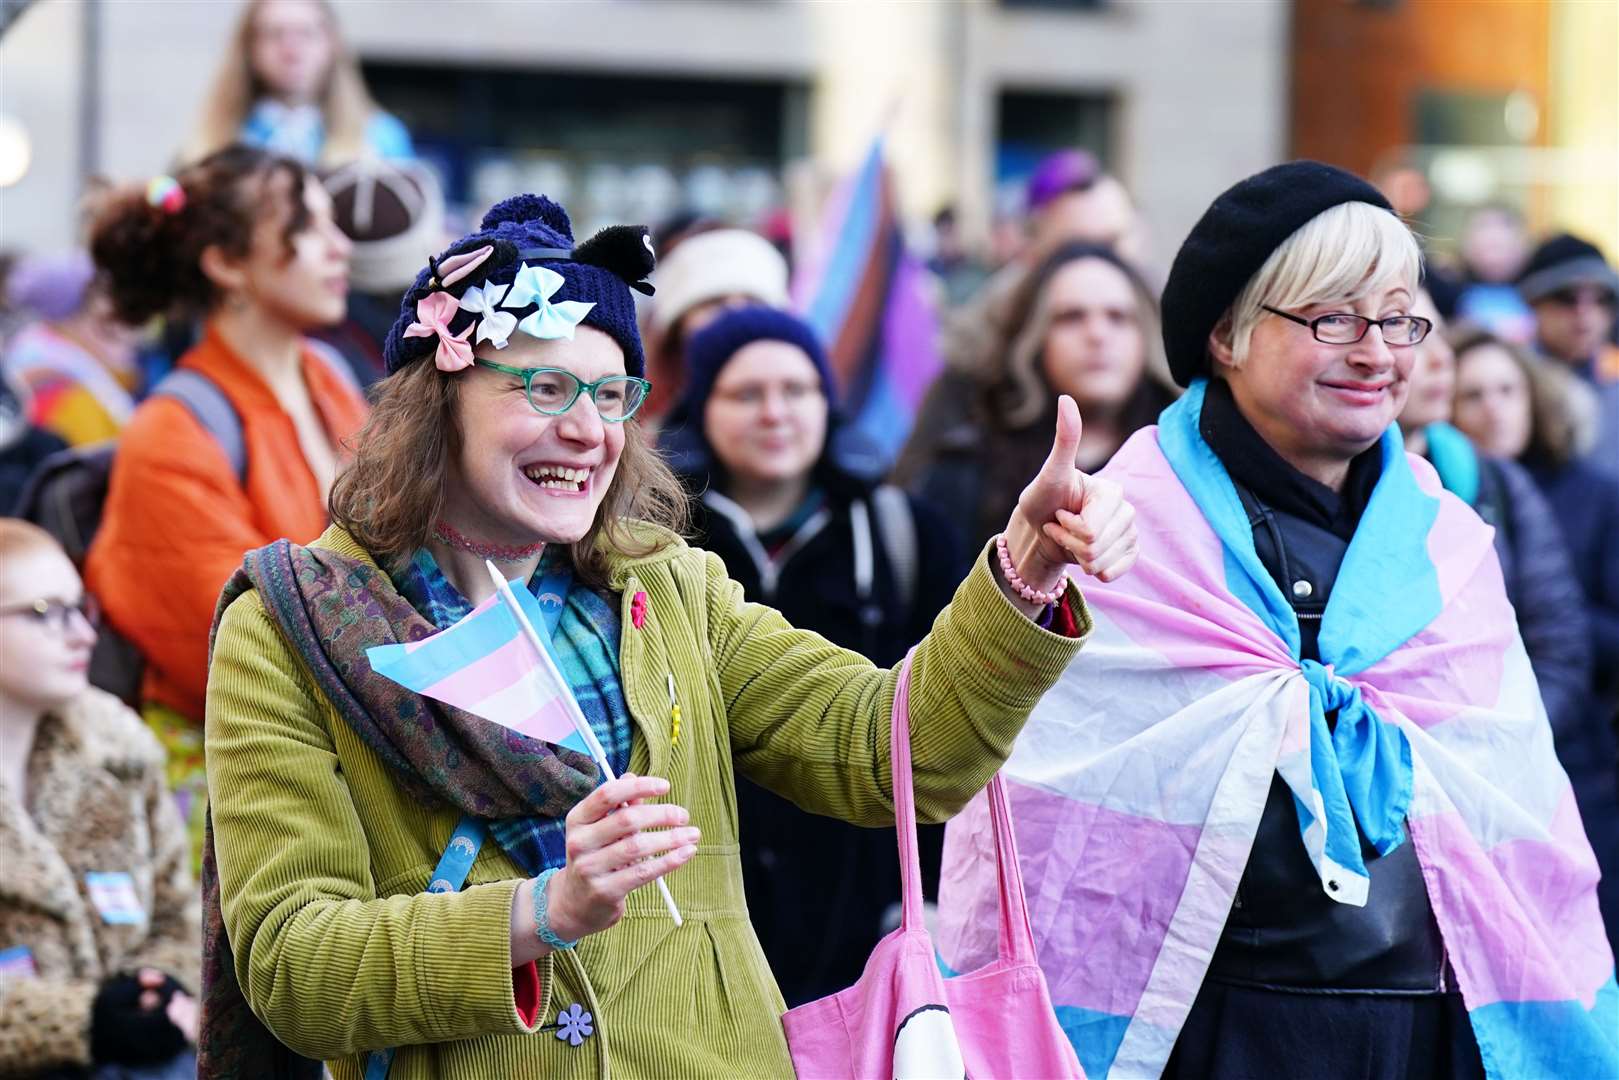 Trans rights campaigners have protested against the decision to block the legislation (Jane Barlow/PA)